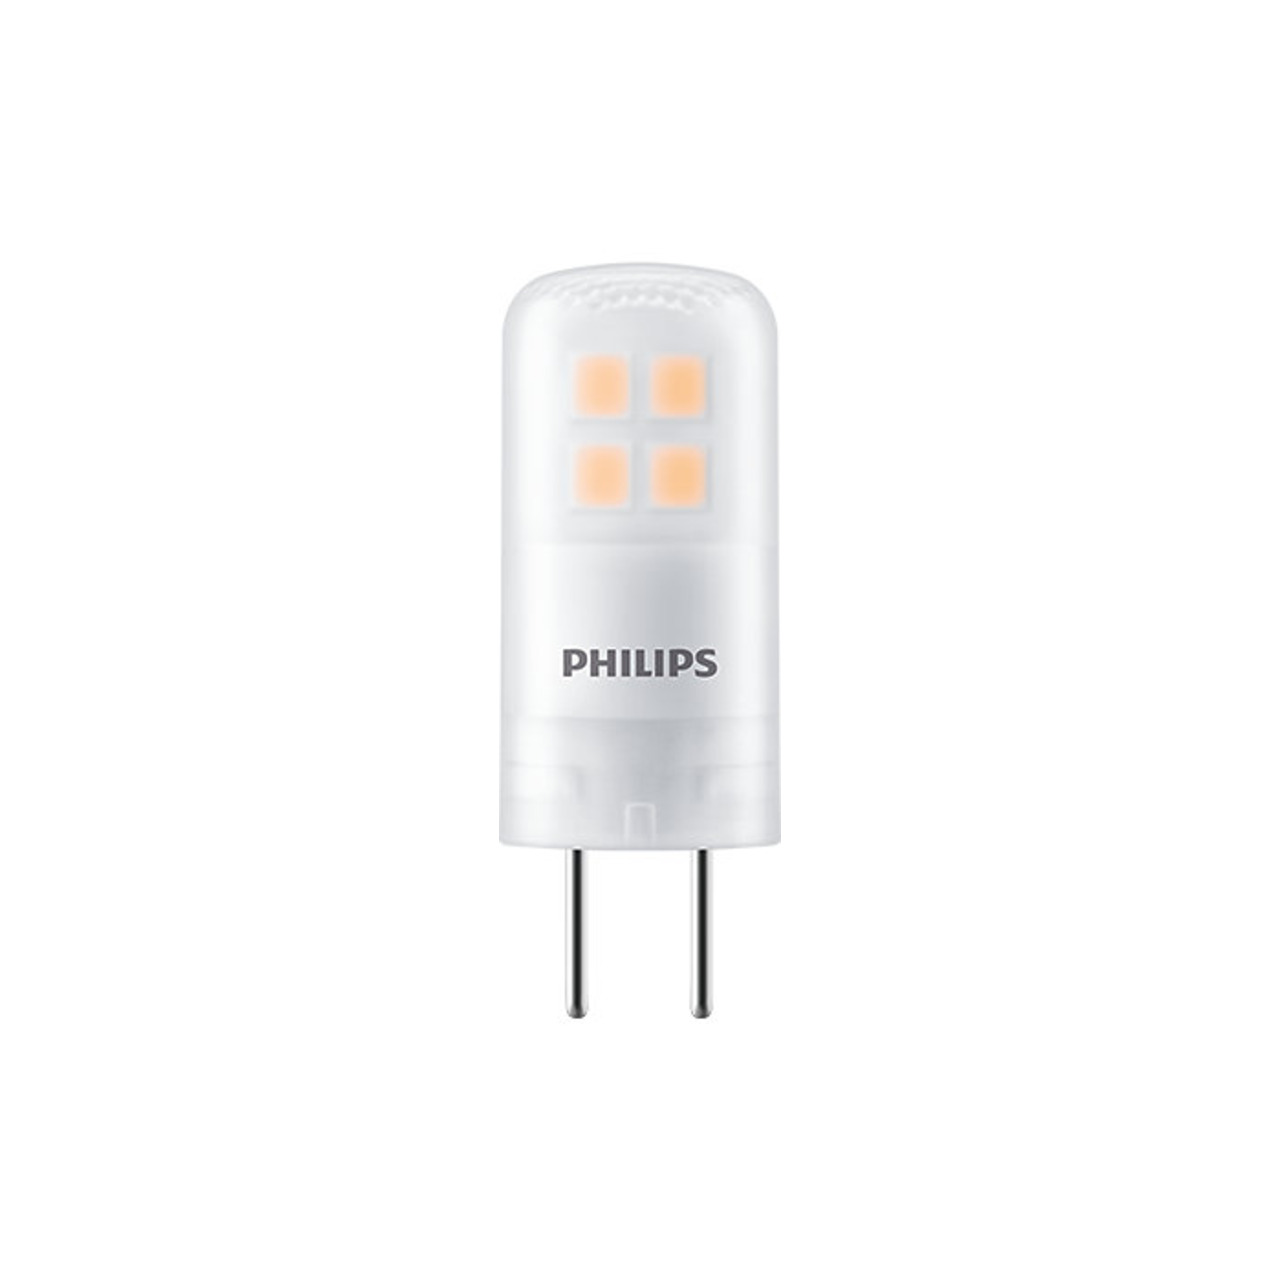 Philips 2-1-W-G4-LED-Lampe CorePro LEDcapsule- 210 lm- dimmbar- warmweiss unter Beleuchtung